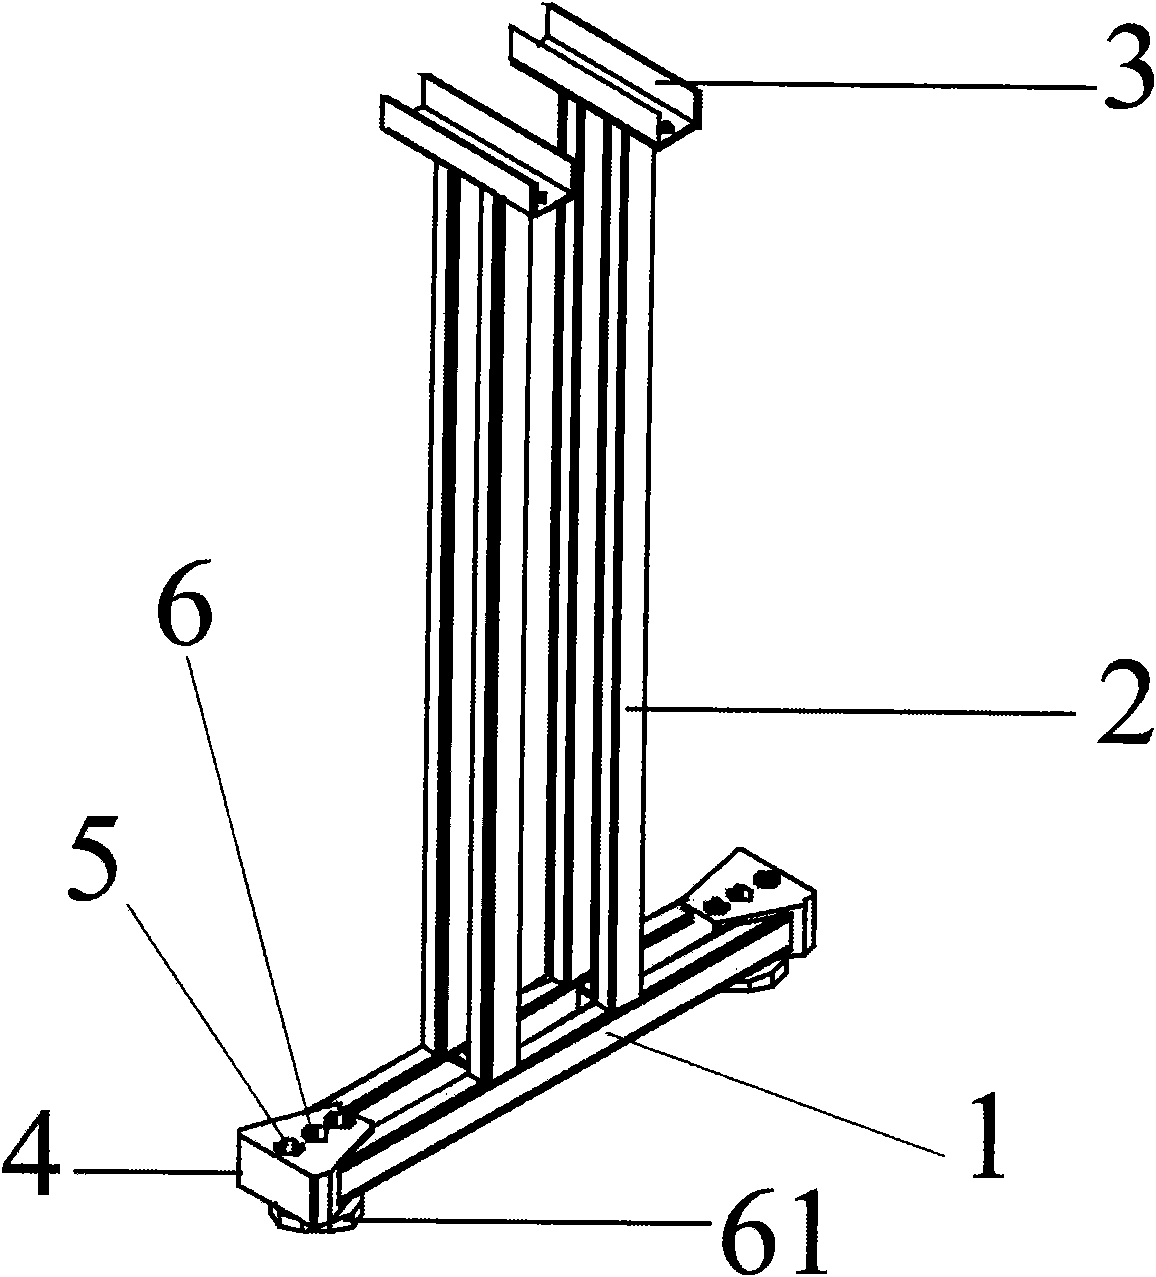 Improved table supporting device